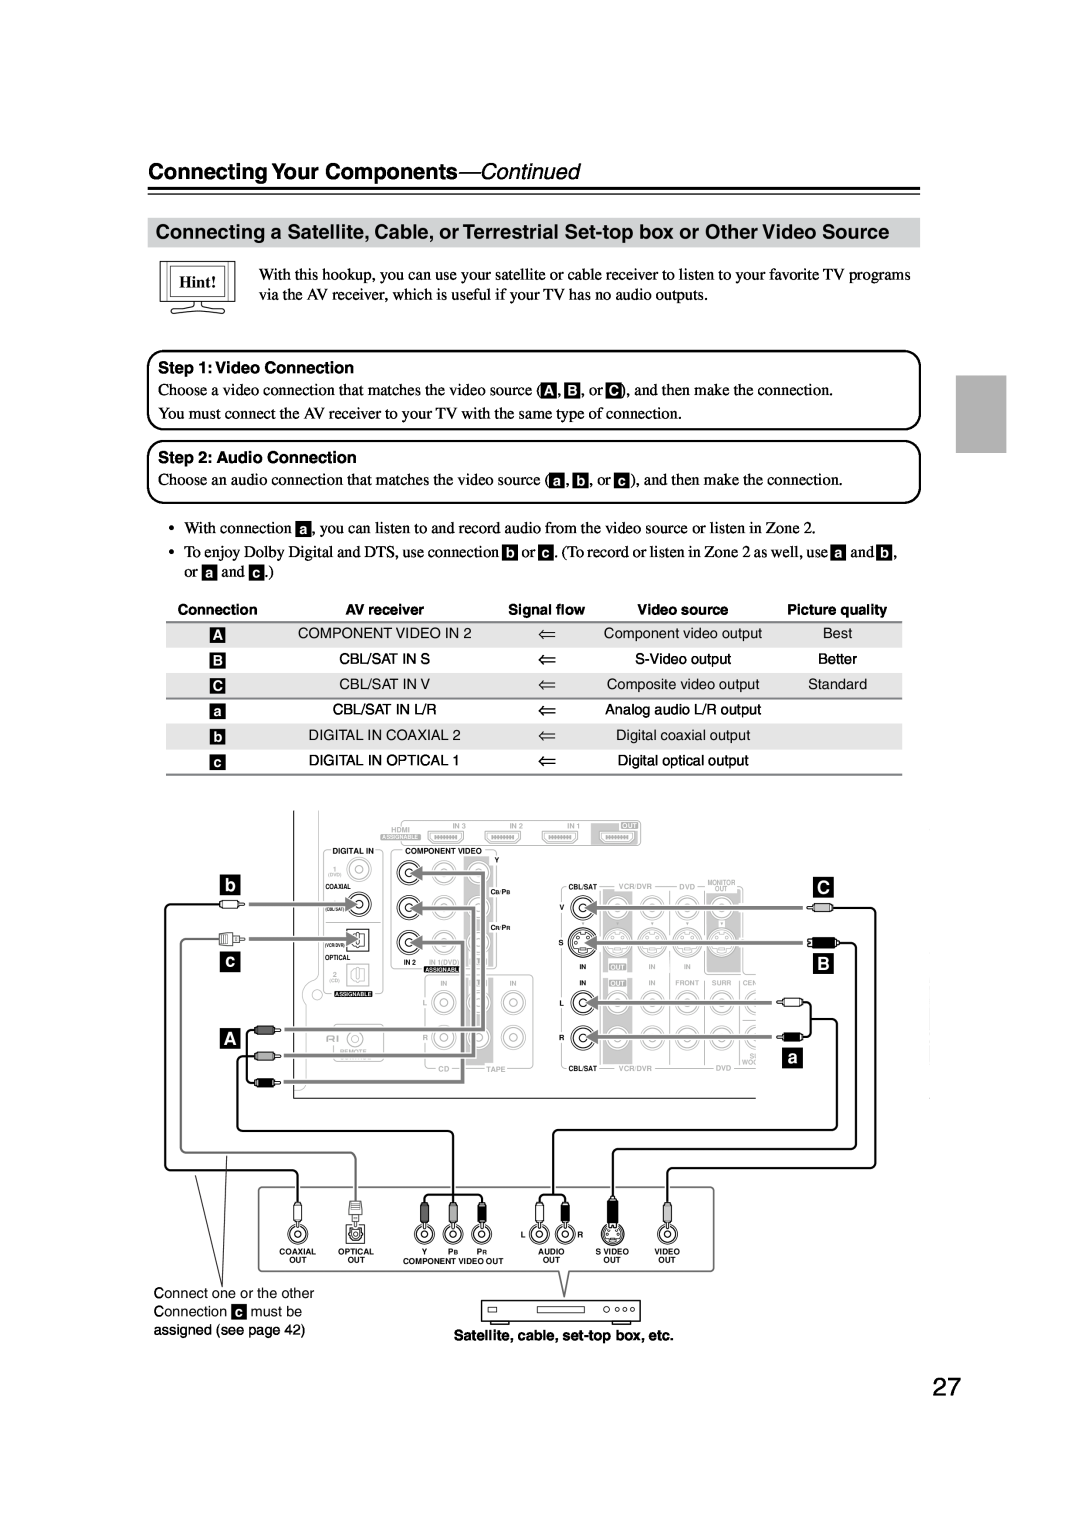 Onkyo TX-SR576, TX-SR506 instruction manual Connecting Your Components—Continued, b c A, Hint, Component Video In 